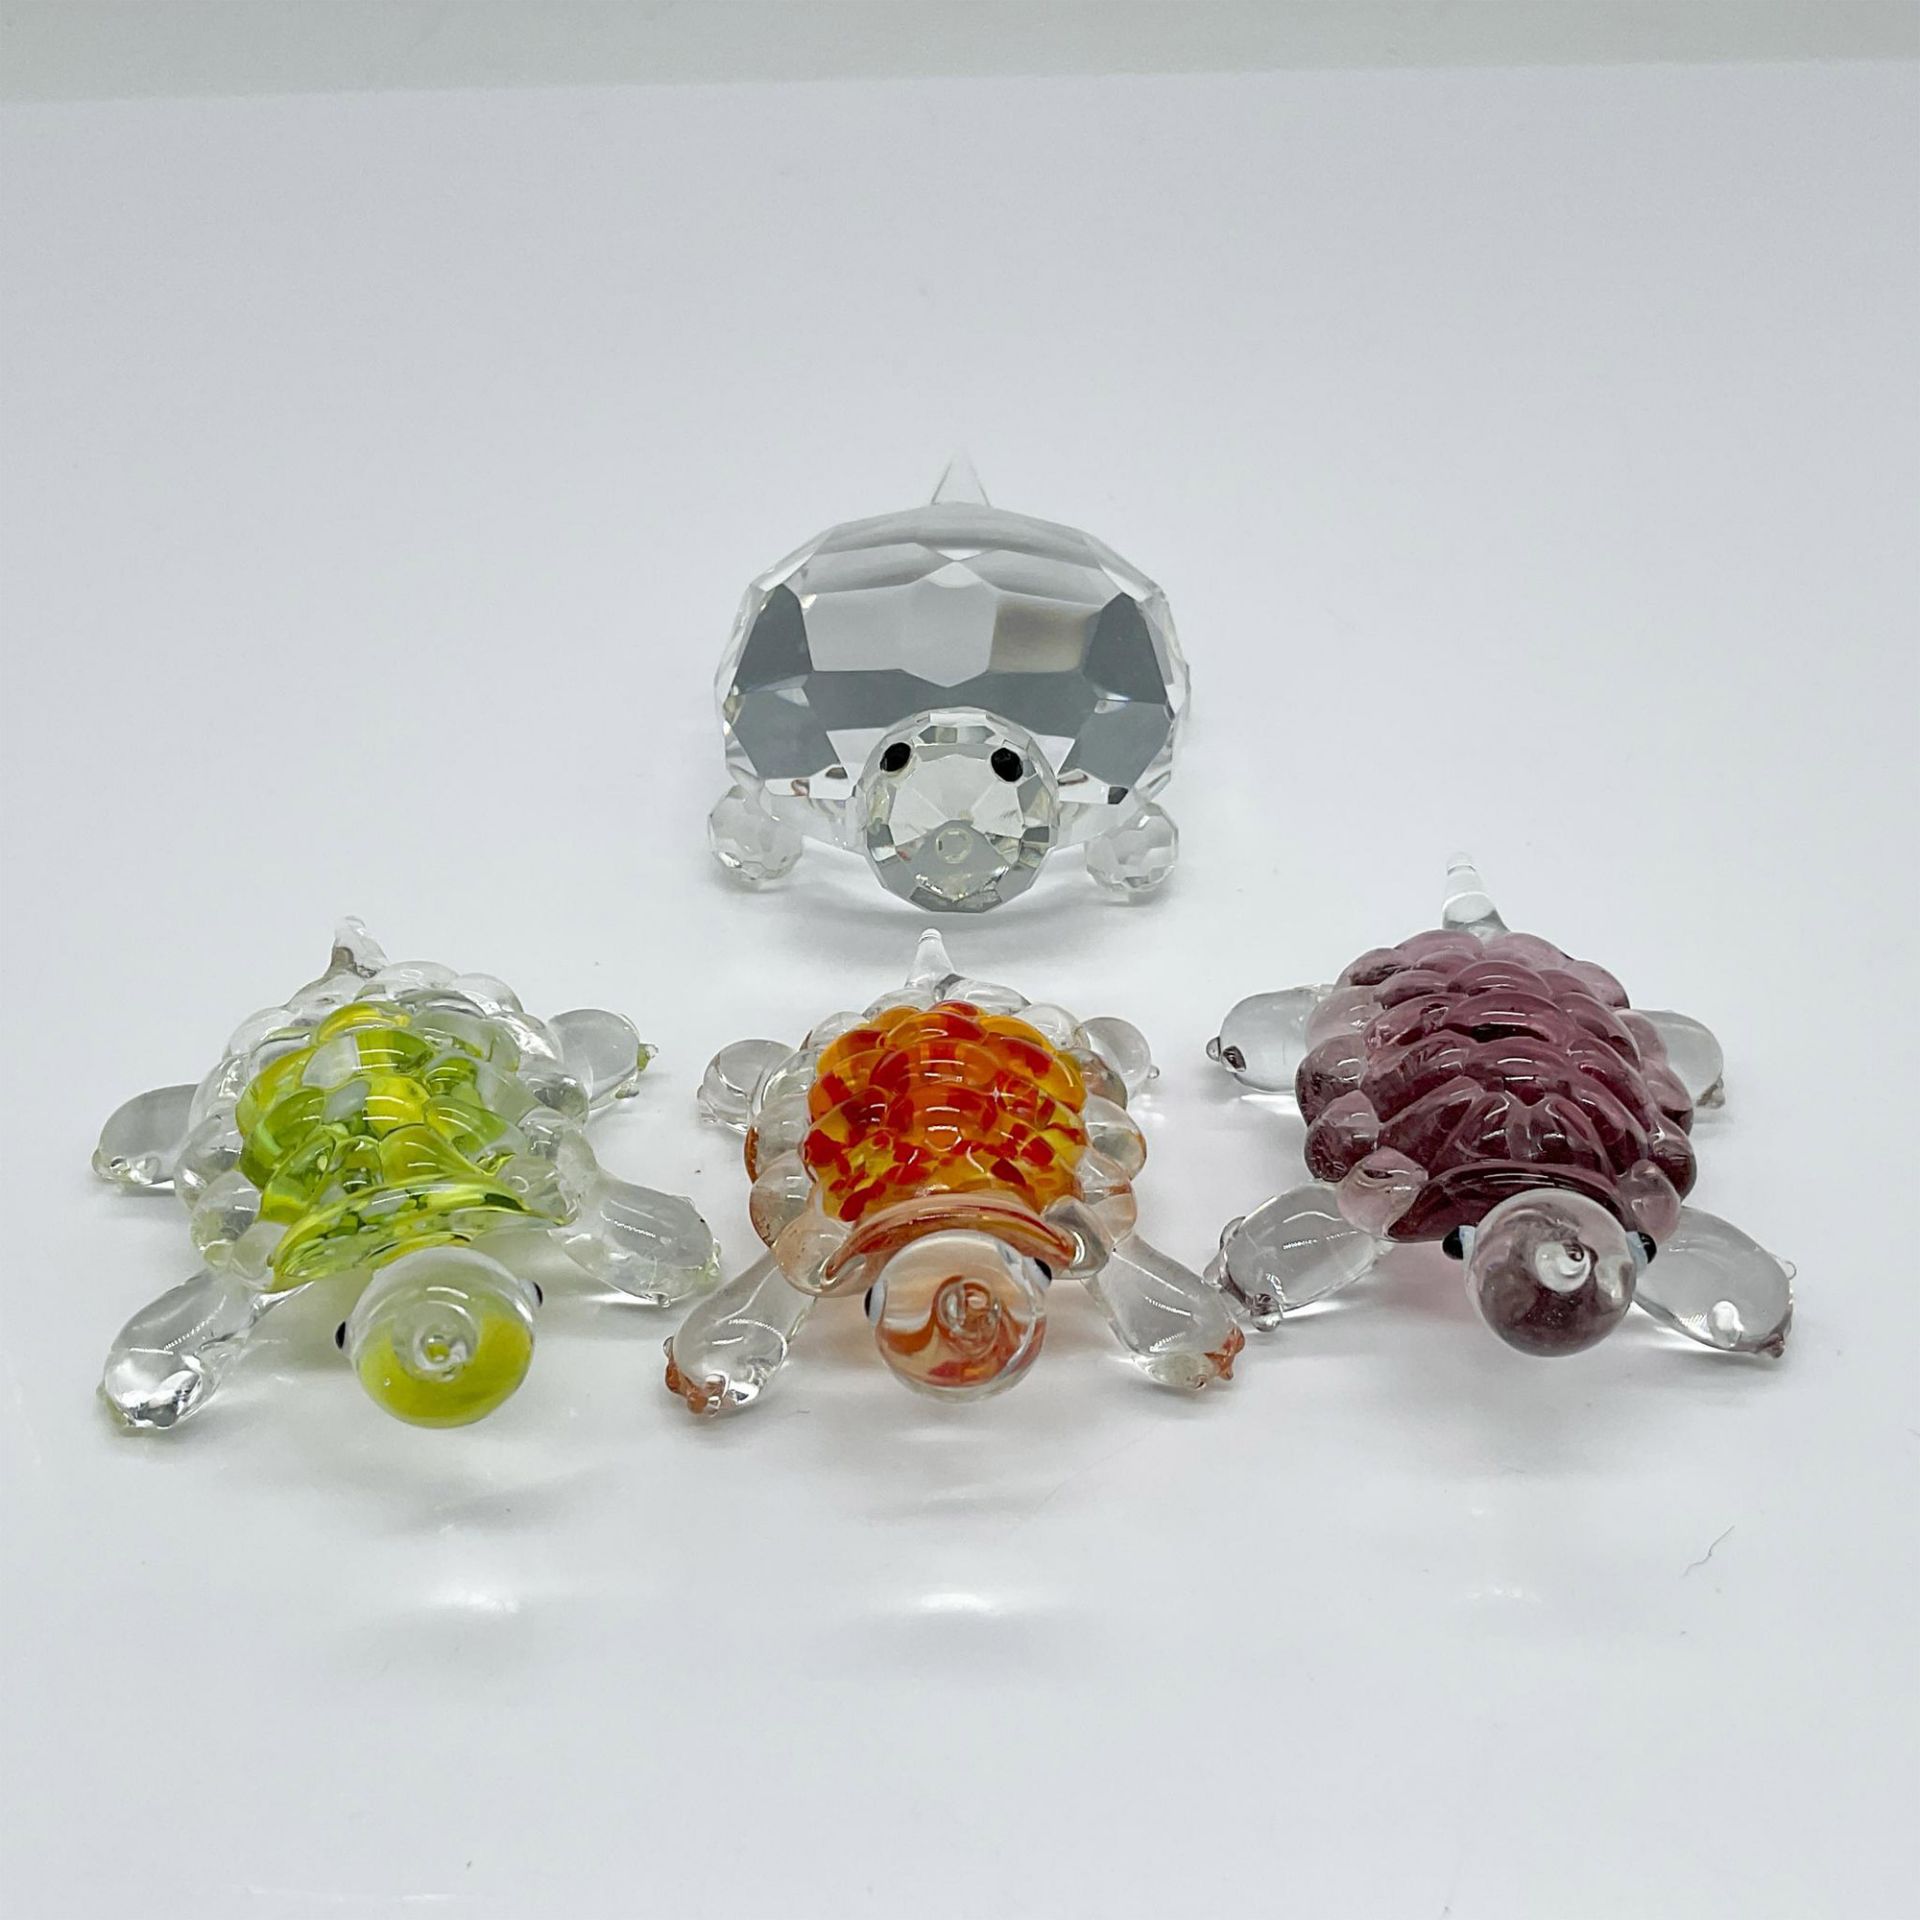 4pc Glass Turtle Grouping, Lenox and Crystal - Image 4 of 4